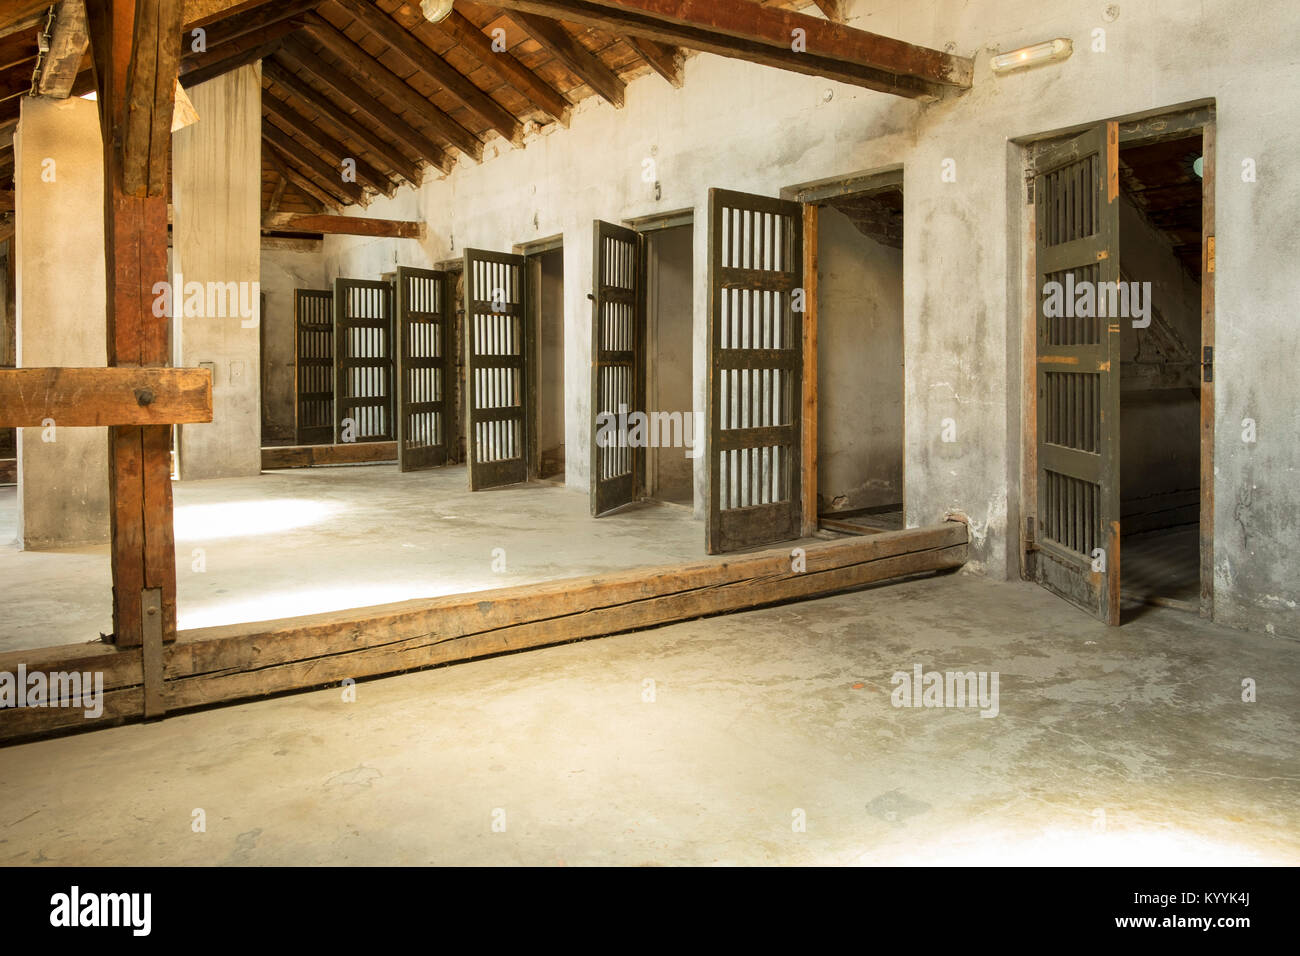 Prison cells inside the Red Cross Camp Museum, Nis, Serbia, adopted by the Nazis during World War II as a transit camp. Stock Photo